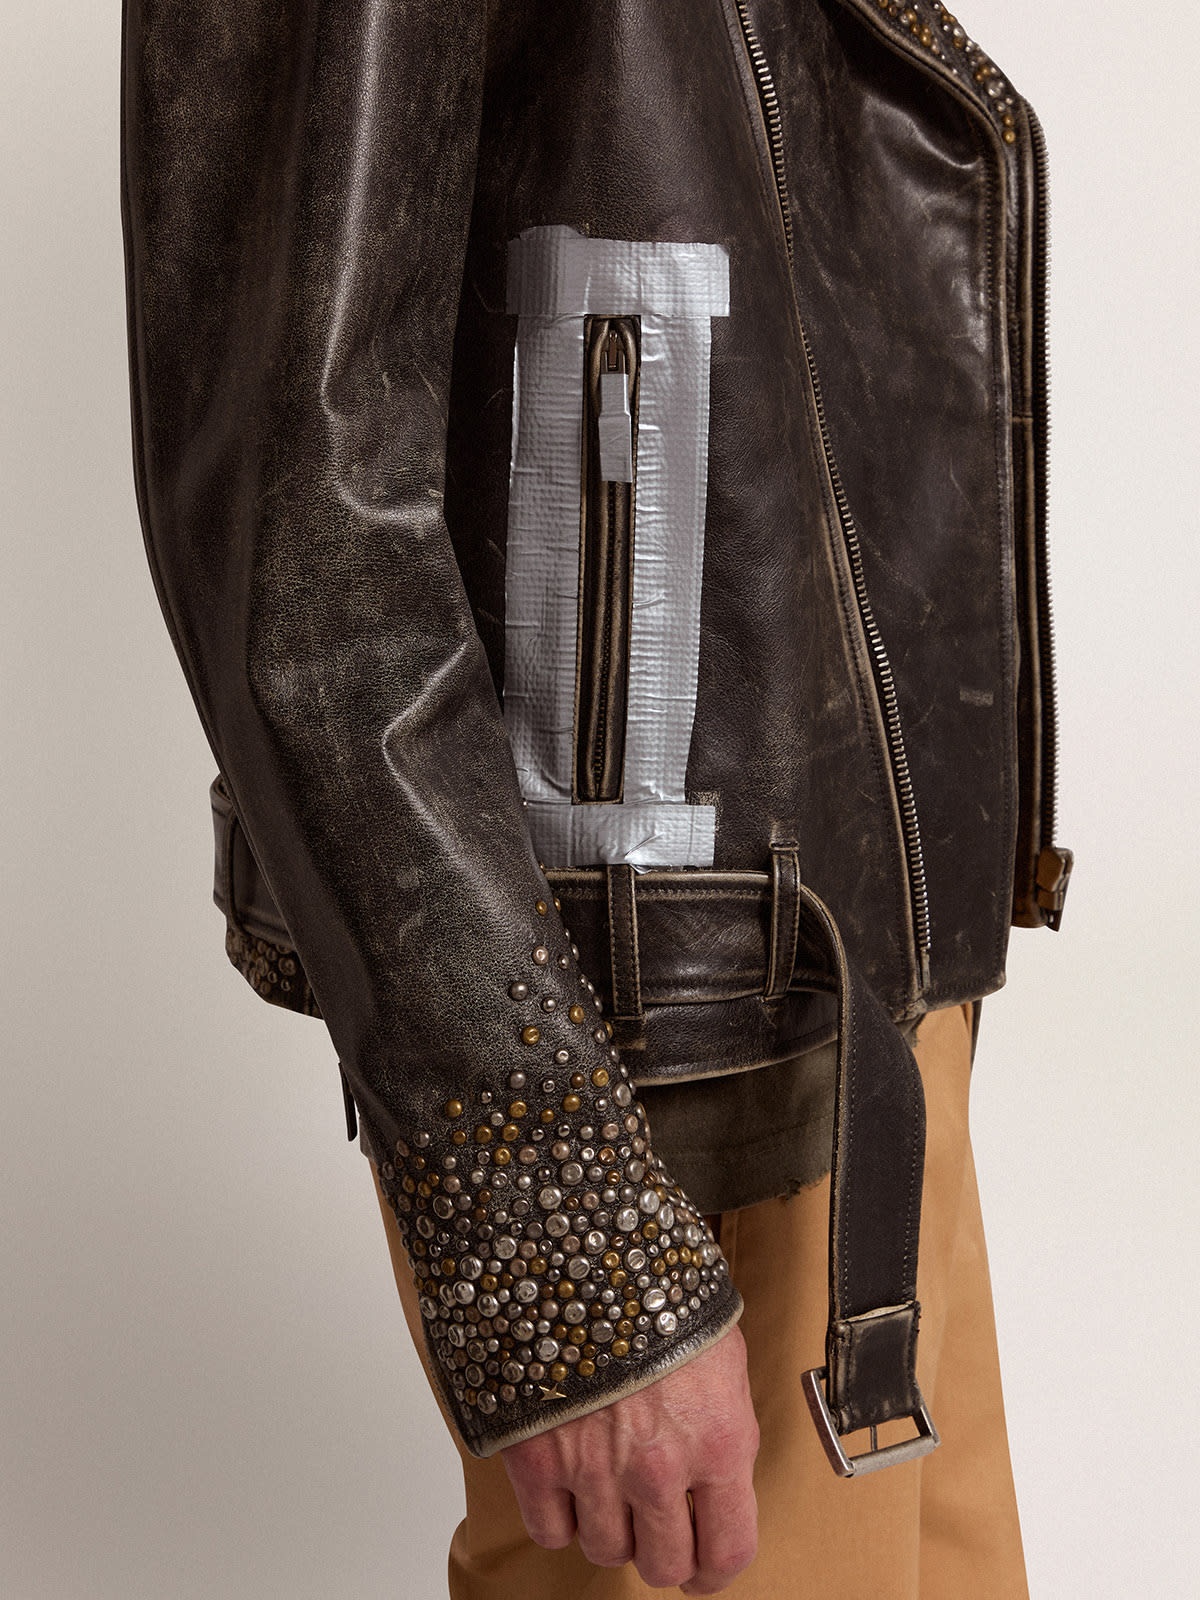 Men's leather biker jacket with hammered studs and adhesive tape - 5